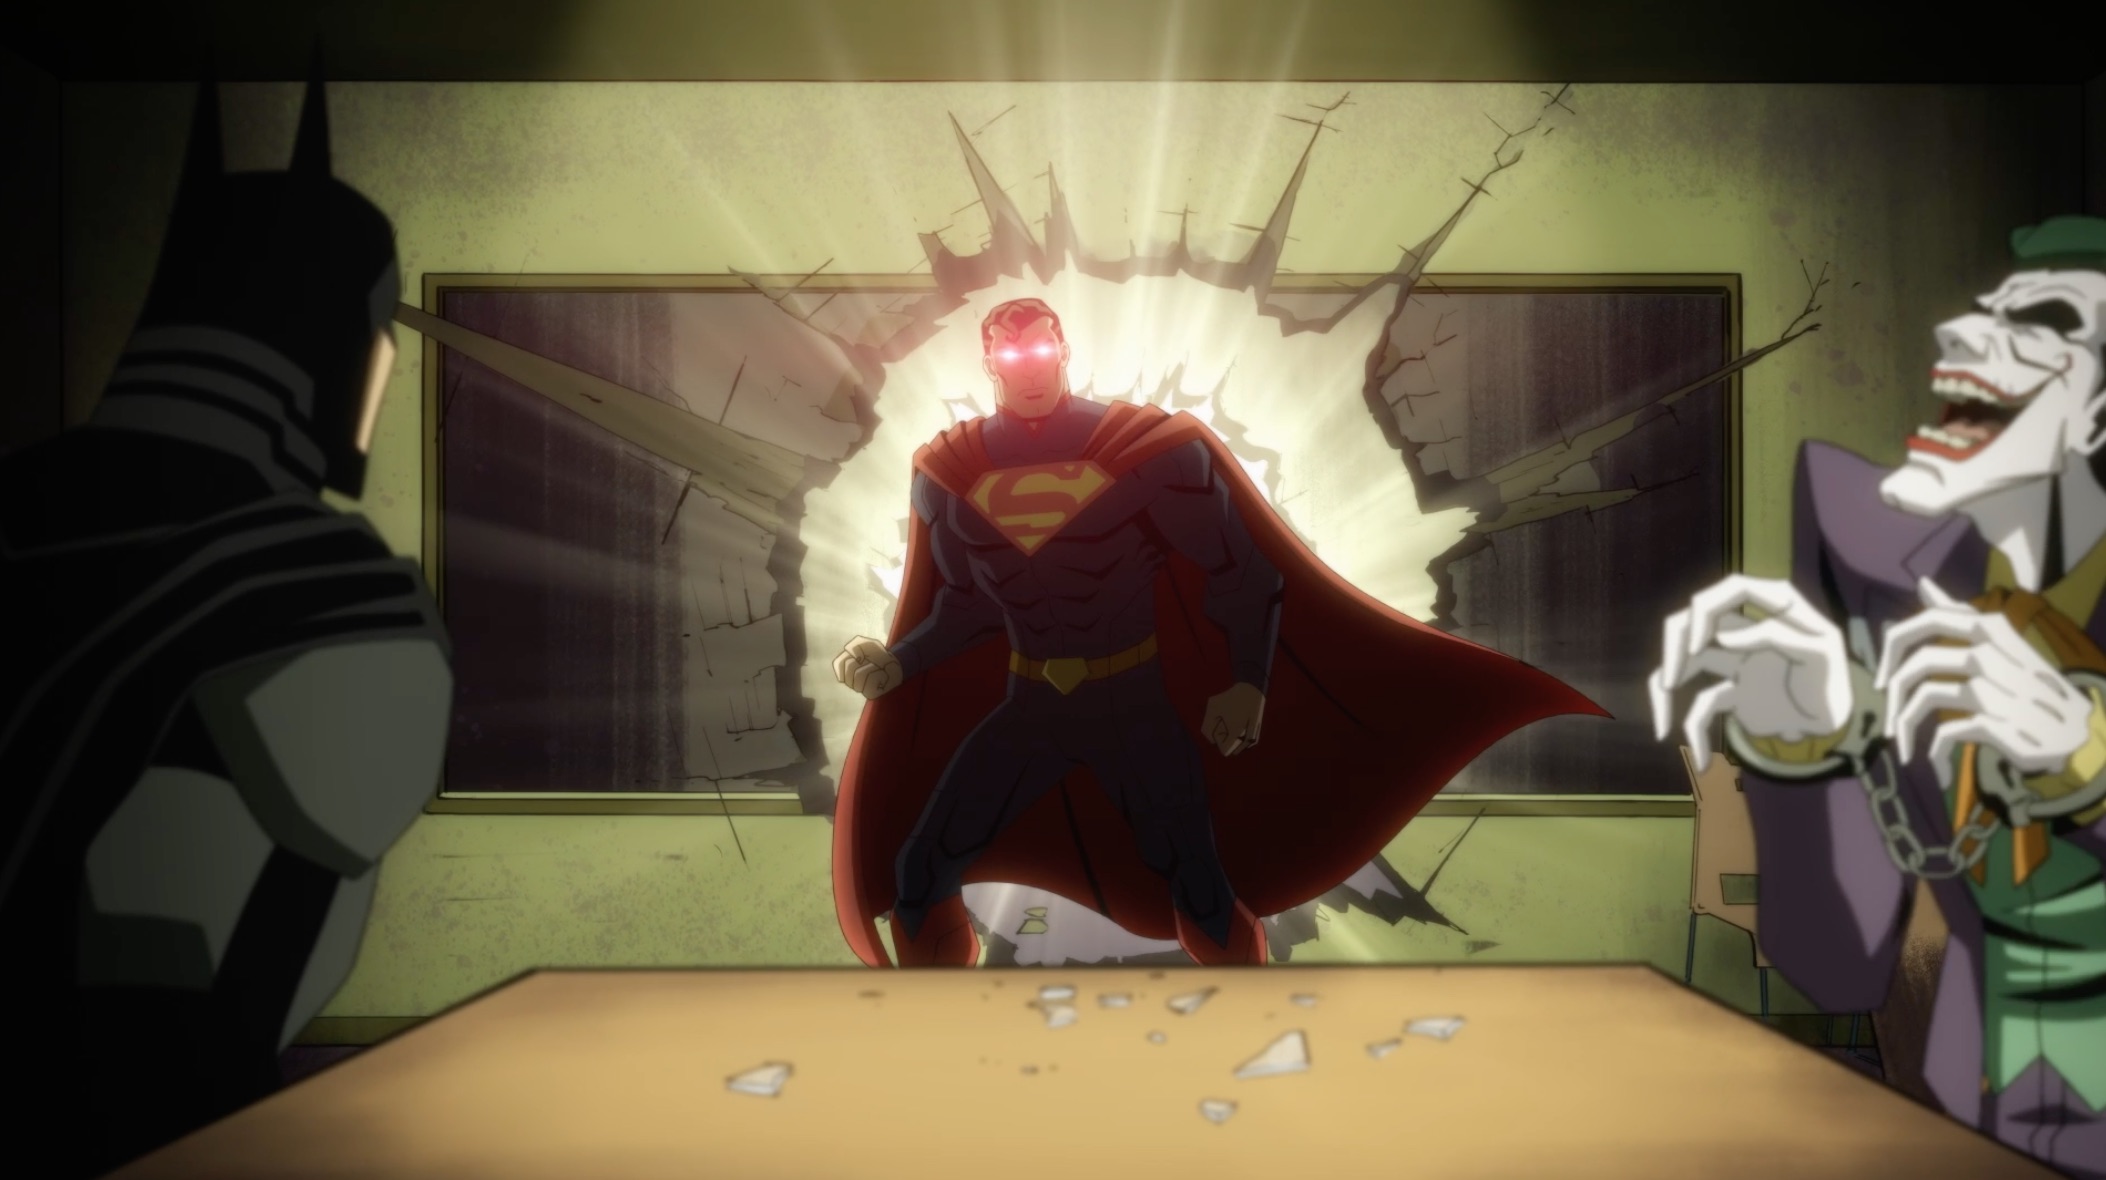 Injustice with Superman